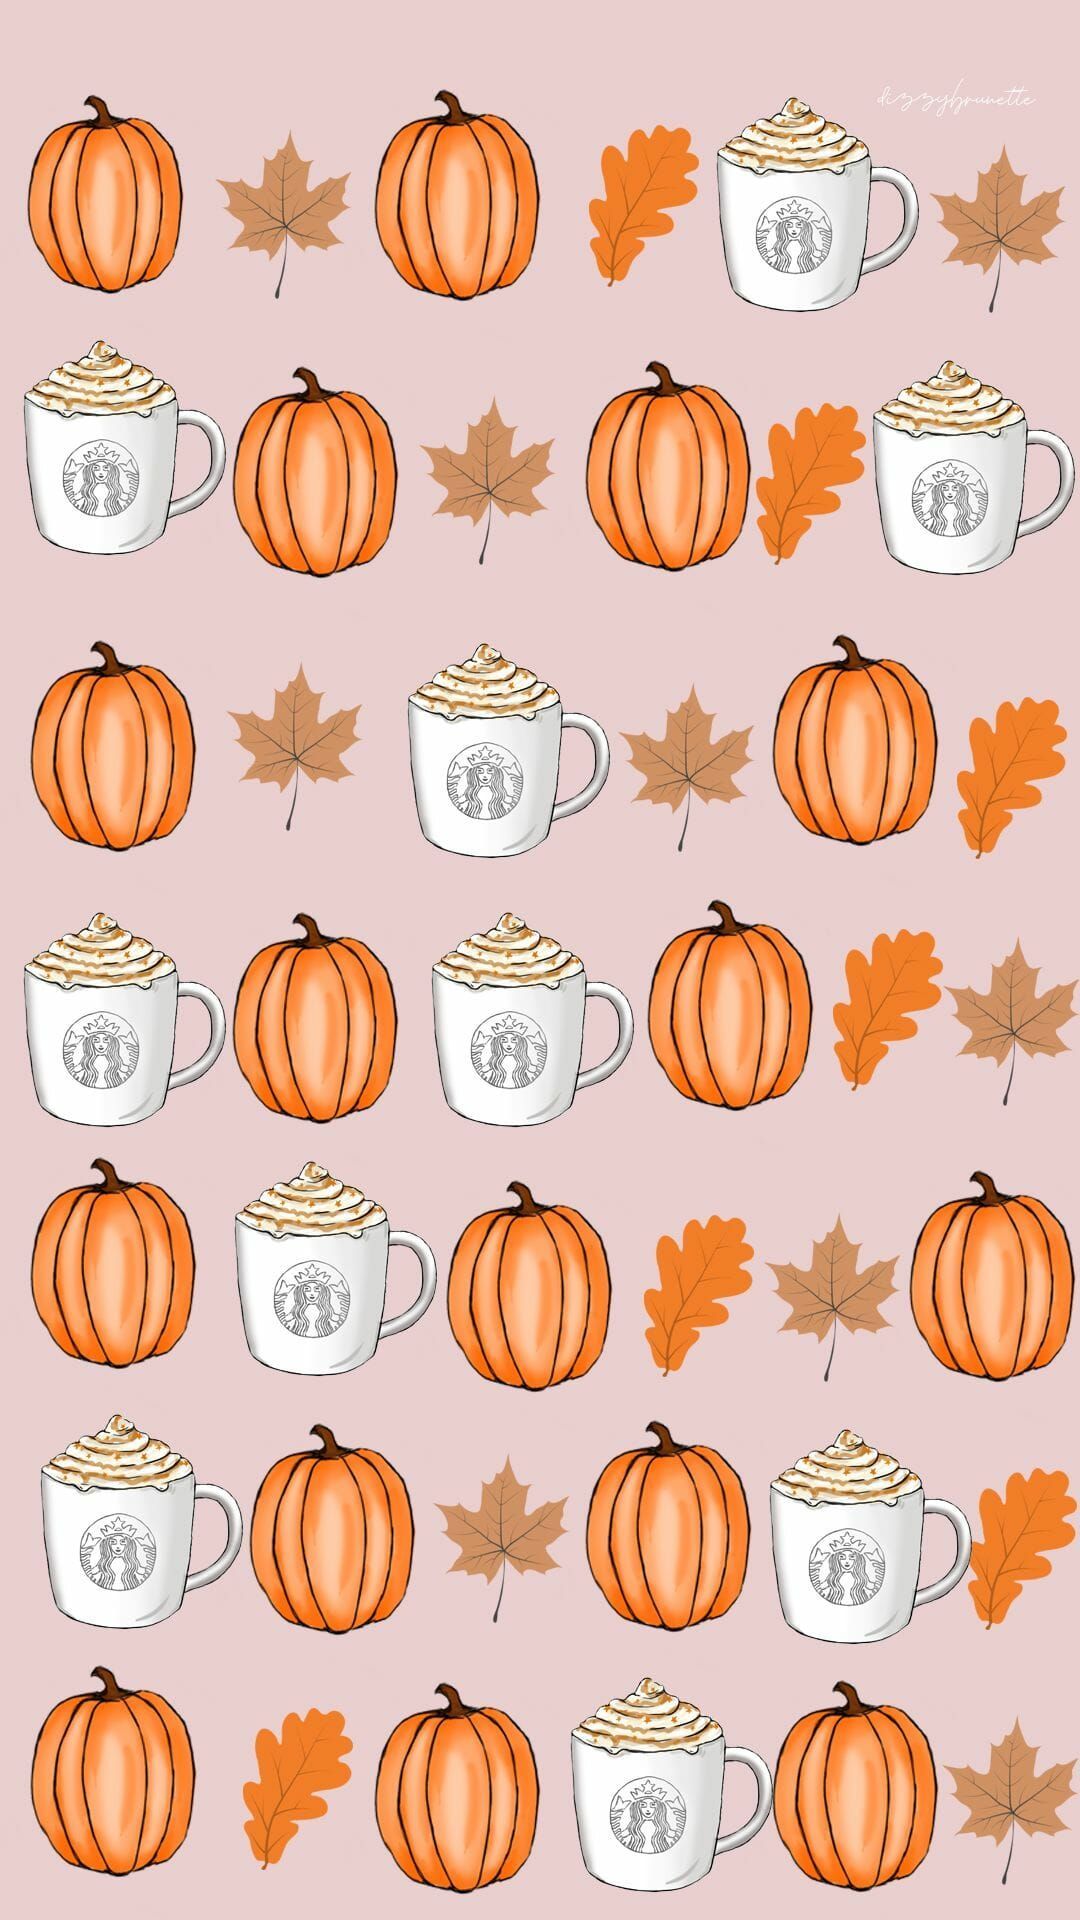 Free Amazing Fall Wallpaper Background For iPhone. iPhone wallpaper fall, Halloween wallpaper iphone, Fall wallpaper